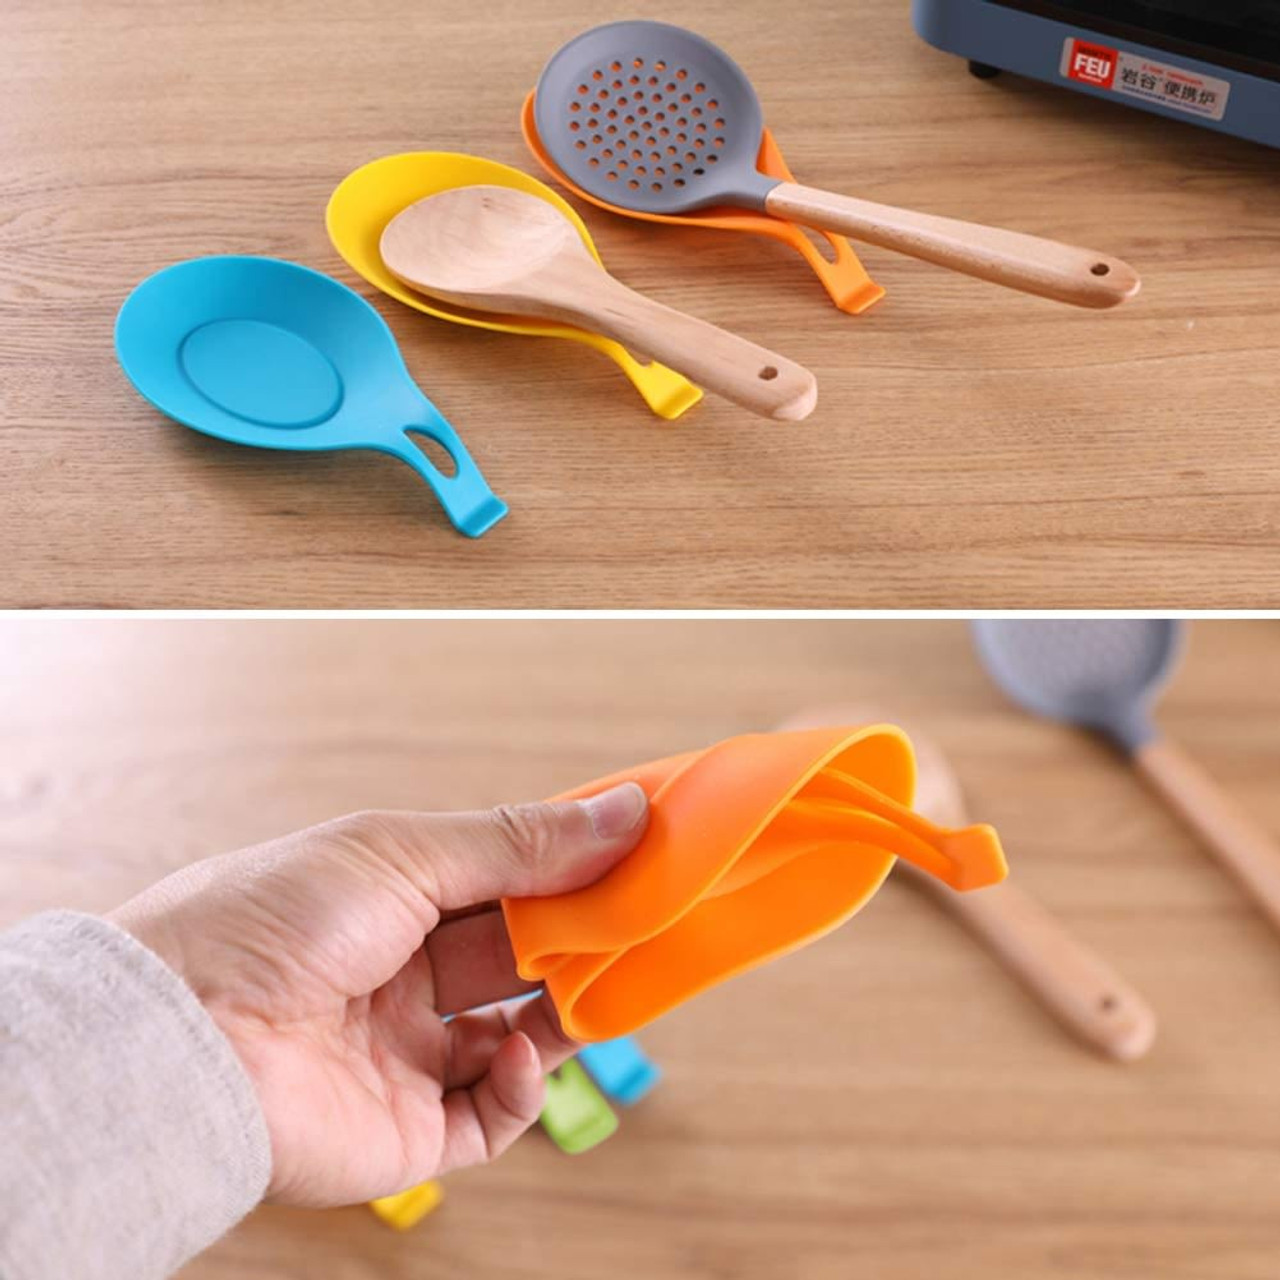 Silicone Spoon Rest, Pot Lid Holder For Kitchen Utensils, Heat Resistant  Kitchenaid Tools (set Of 2)